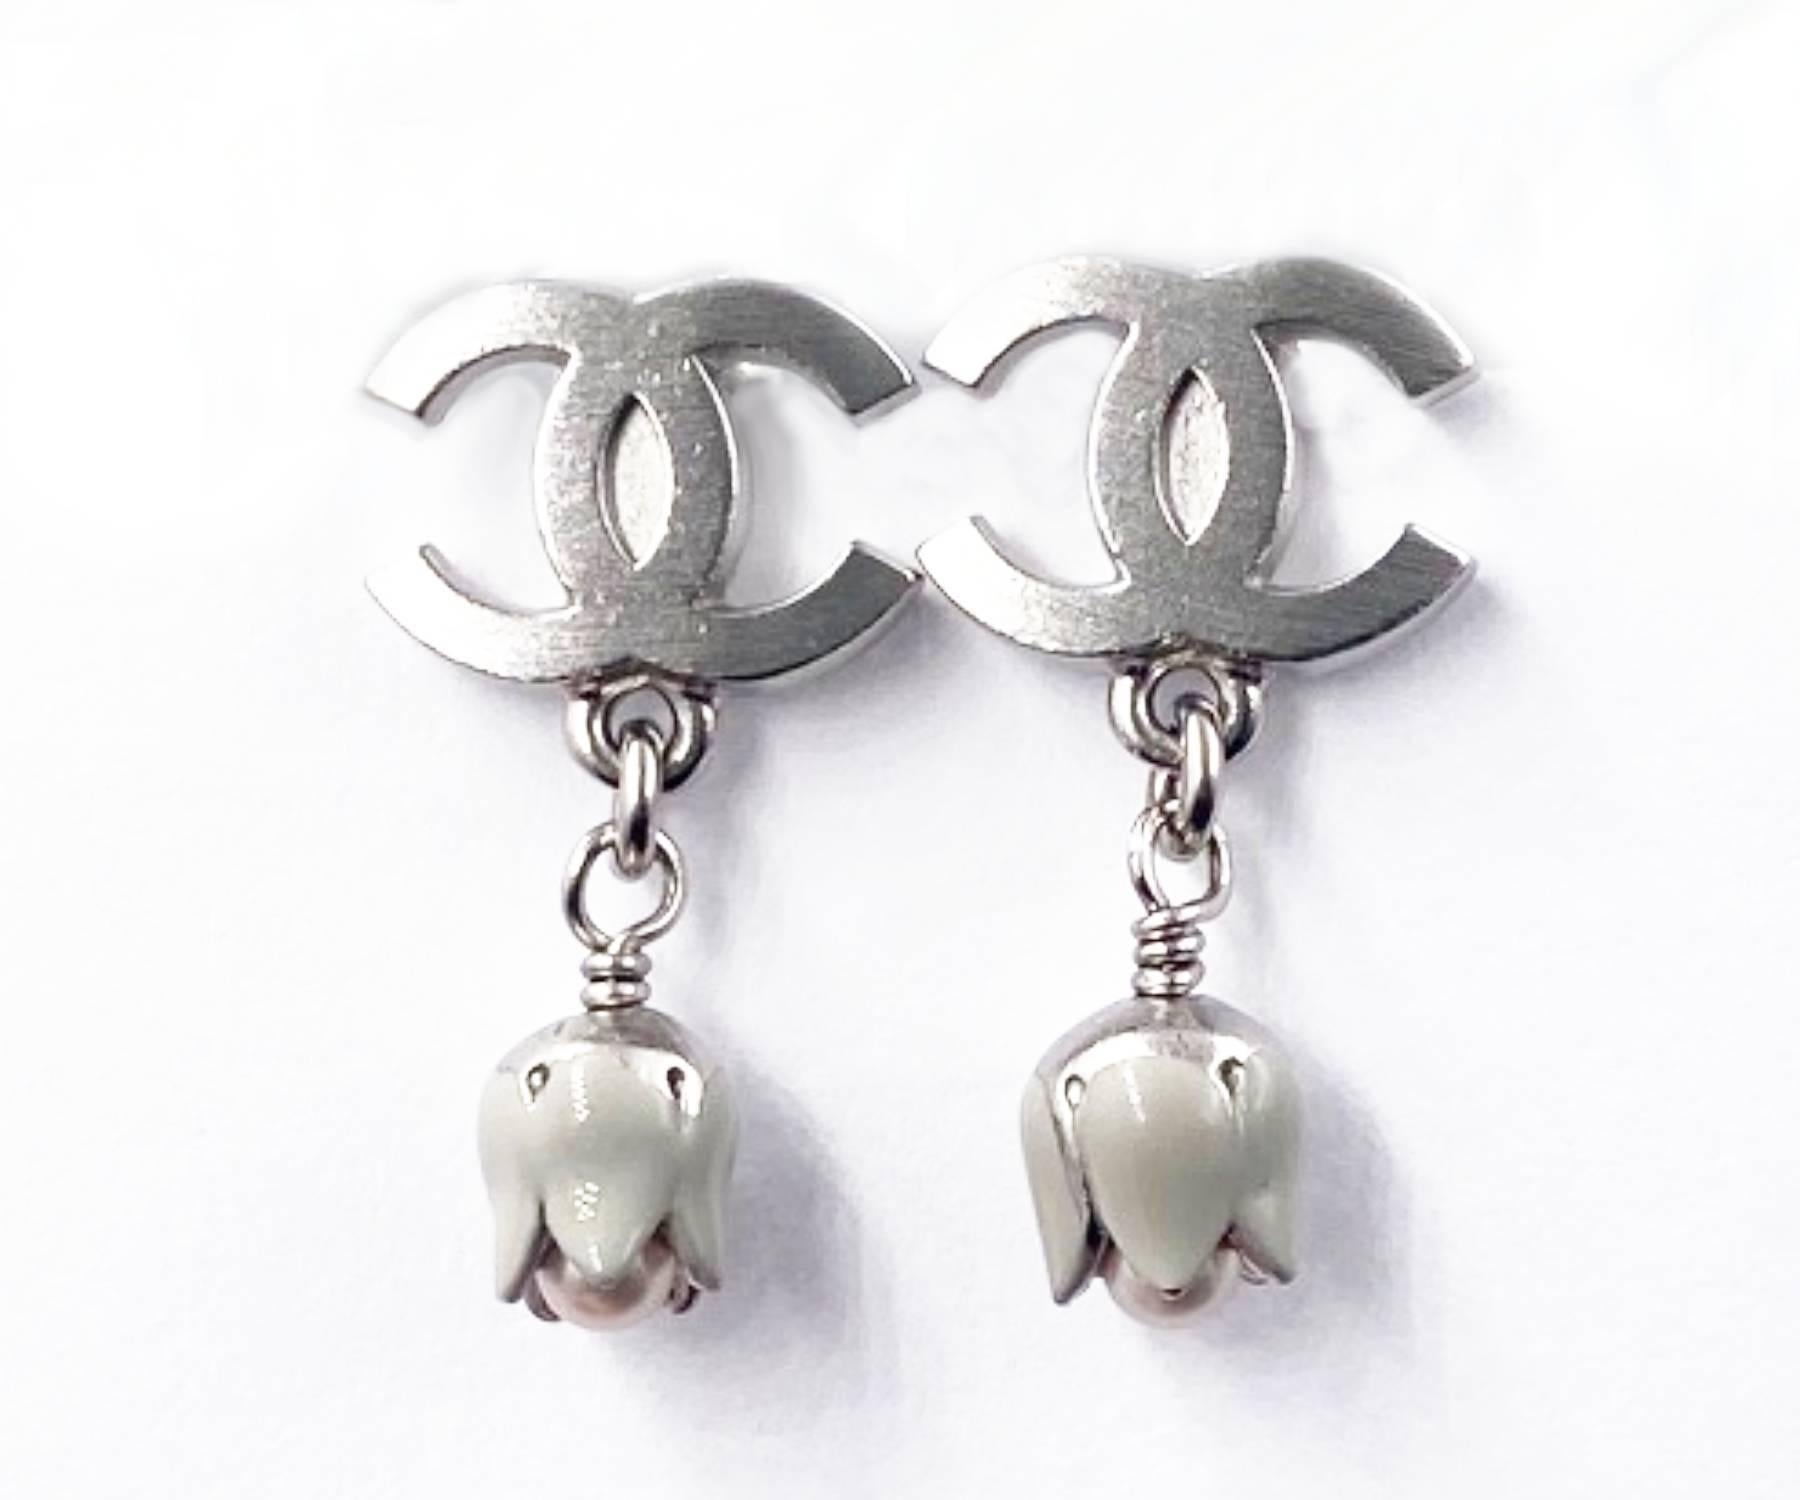 Chanel Silver CC Tulip Dangle Piercing Earrings

* Marked 05
* Made in France

-It is approximately 0.75